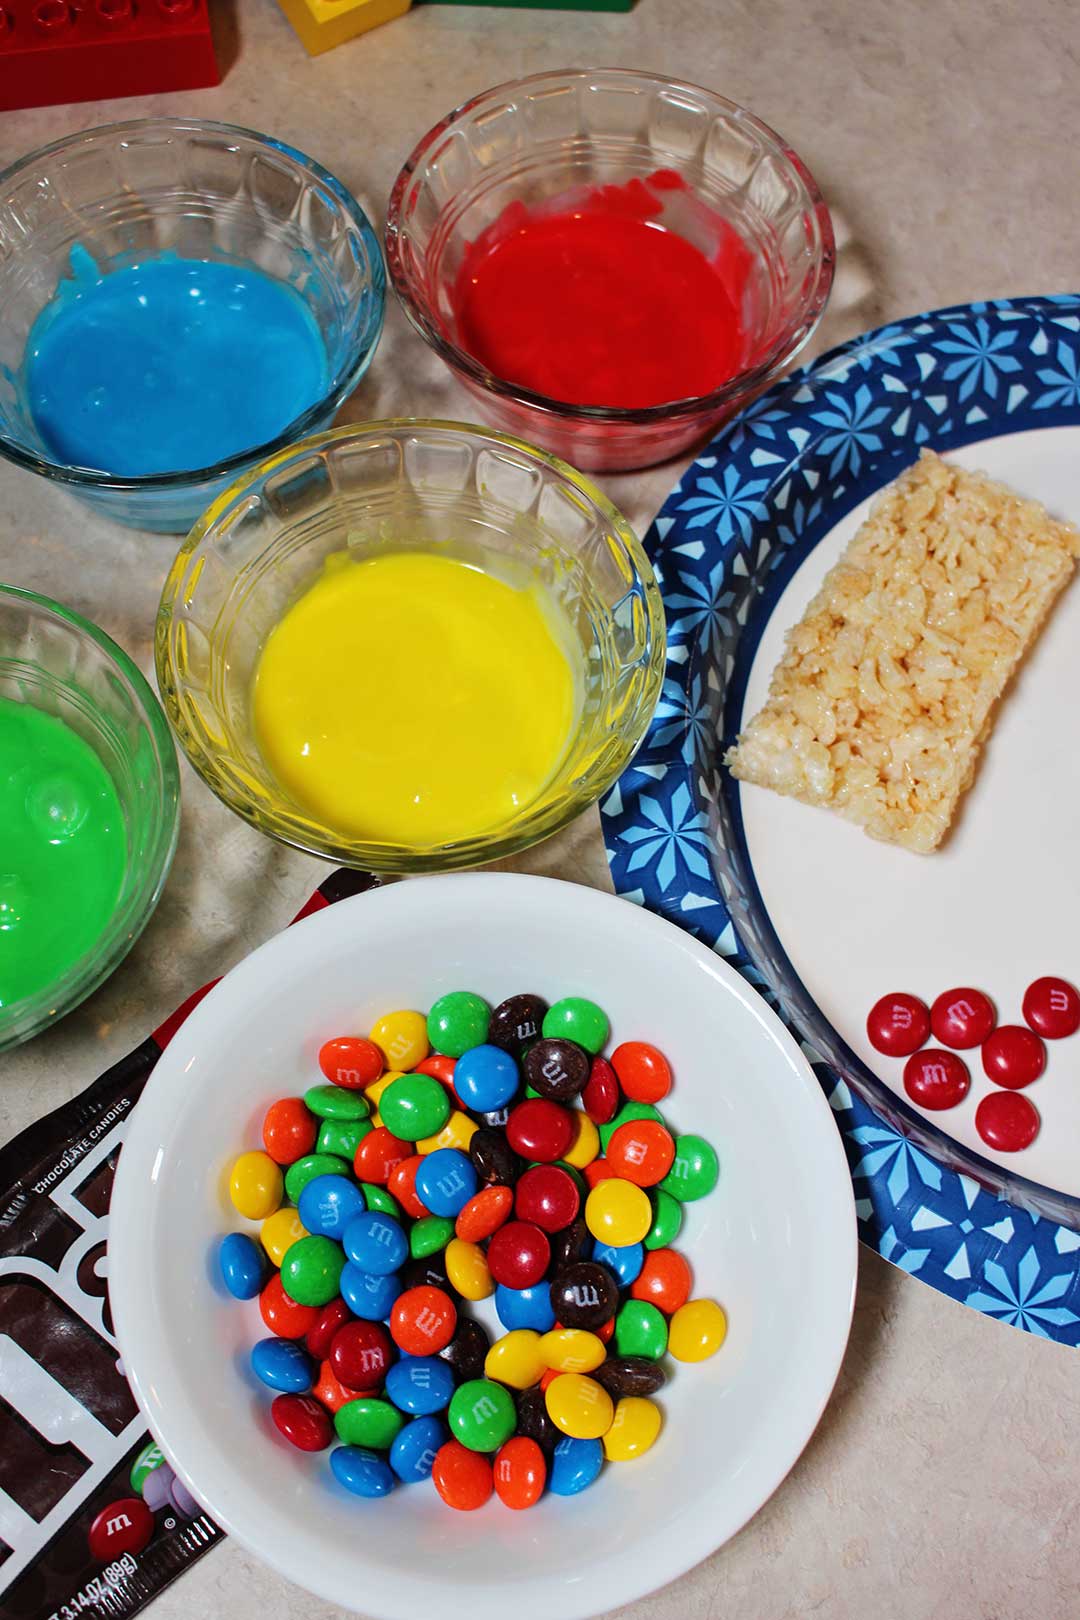 Yellow, blue, red, and green frosting near a bowl of M&Ms and a rice crispy treat on a plate.